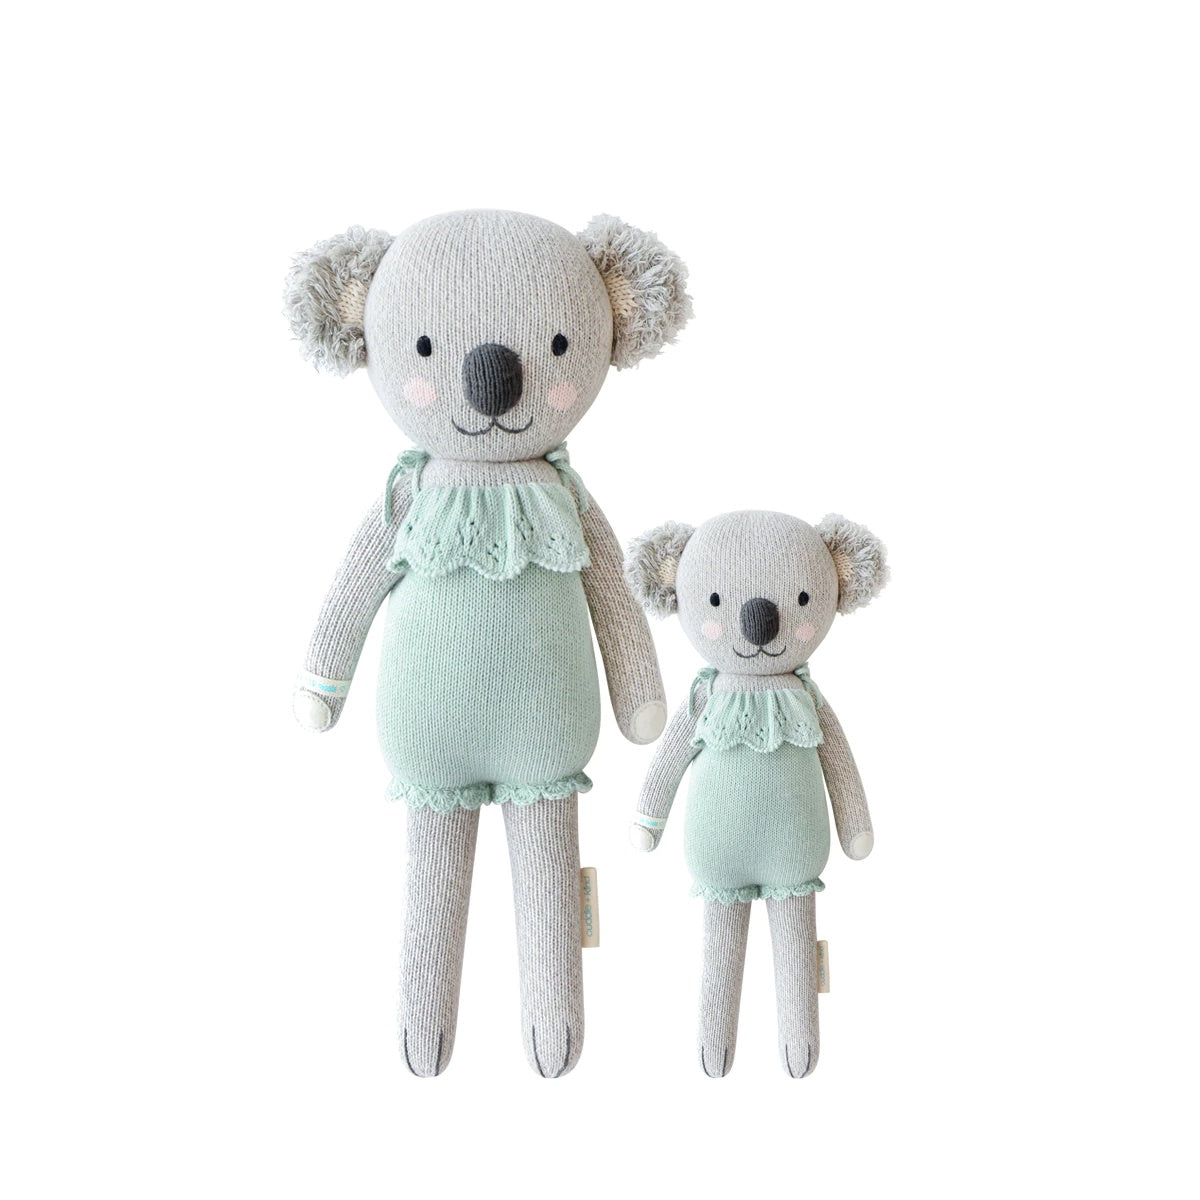 Claire the koala in mint